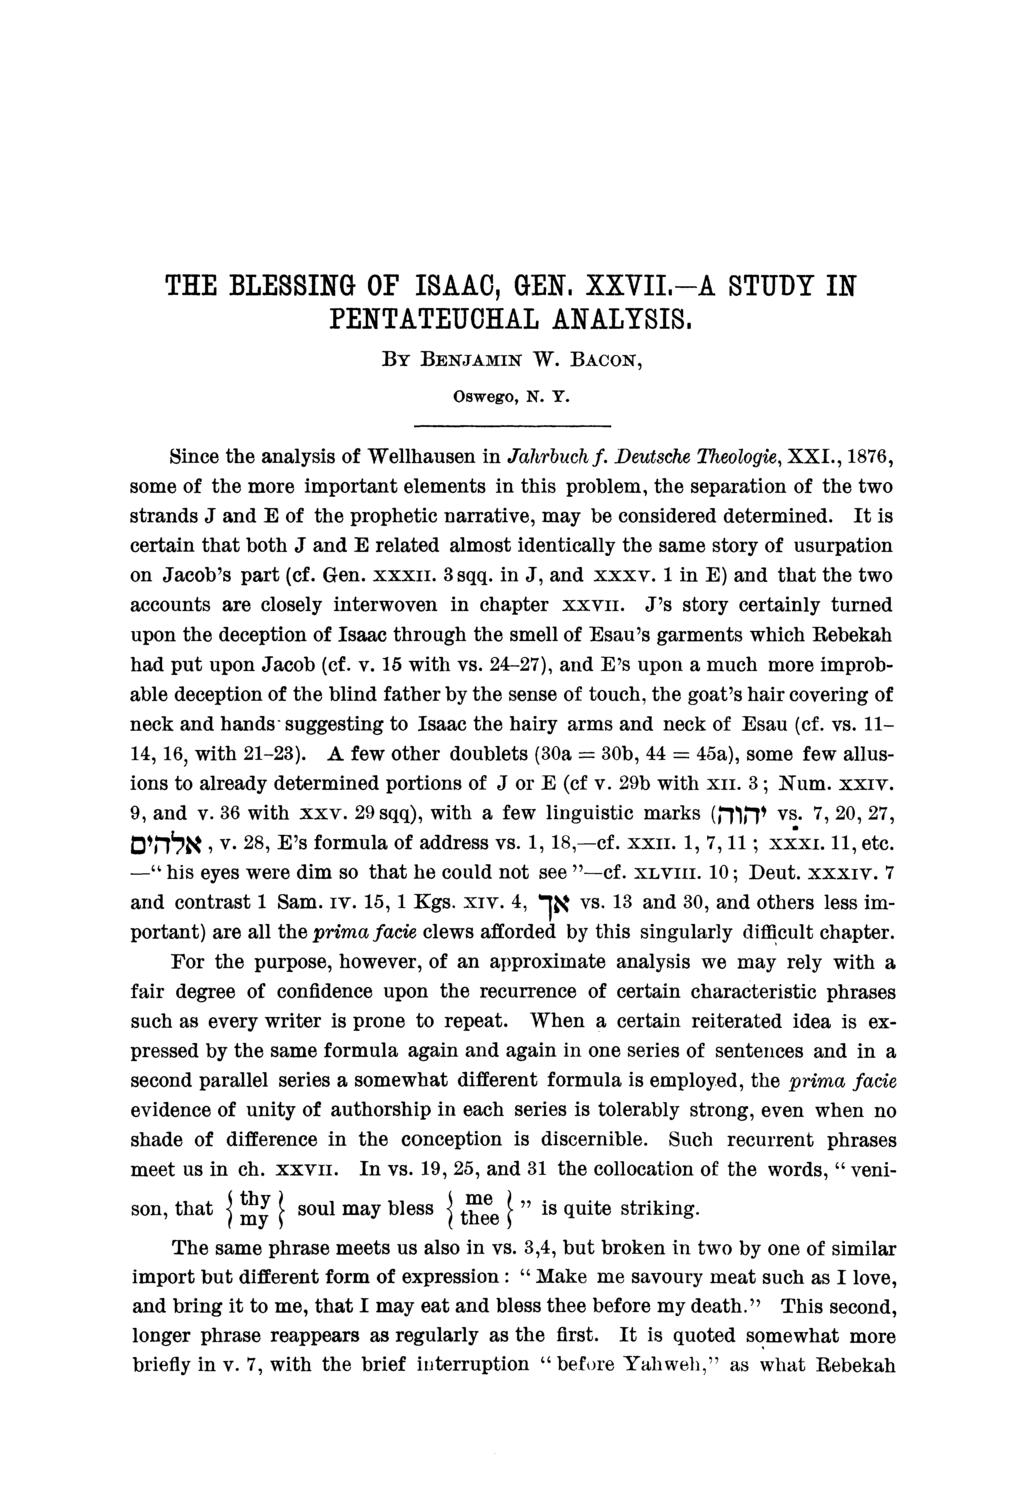 THE BLESSING OF ISAAC, GEN, XXVII,-A STUDY IN PENTATEUCHAL ANALYSIS., BY BENJAMIN W. BACON, Oswego, N. Y. Since the analysis of Wellhausen in Jahrbuch f. Deutsche Theologie, XXI.